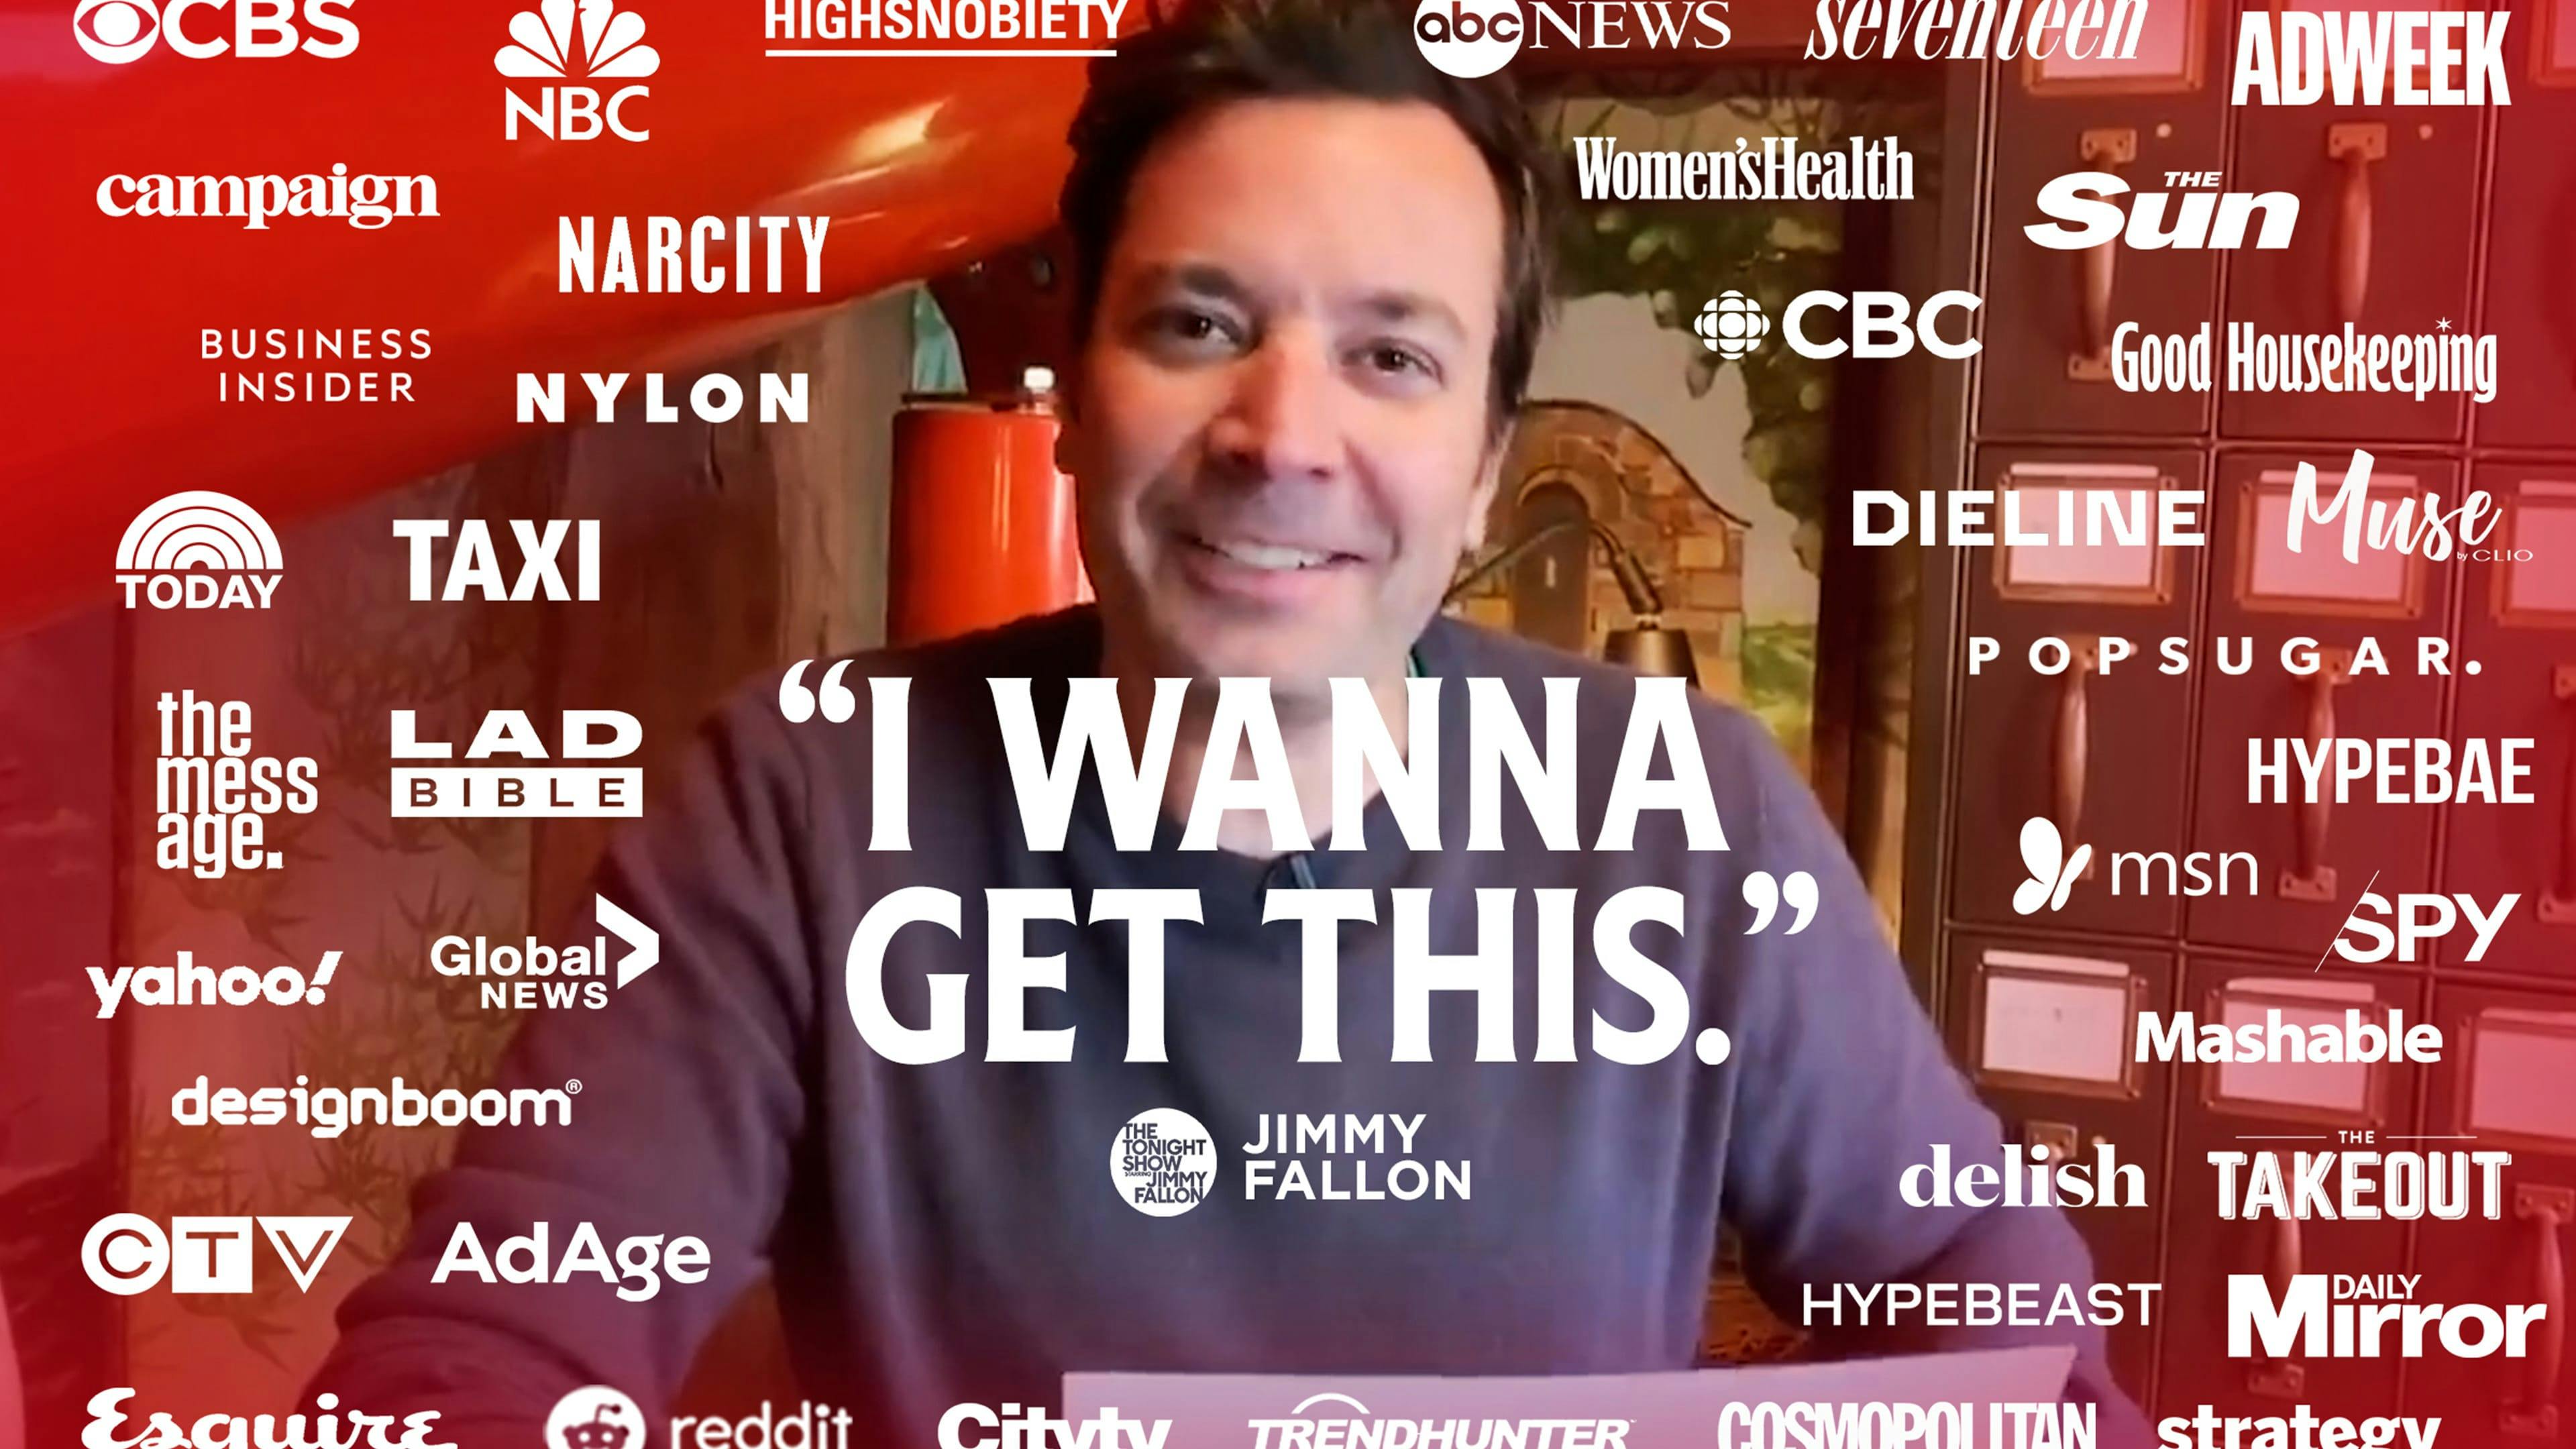 Jimmy Fallon - "I want to get this" 